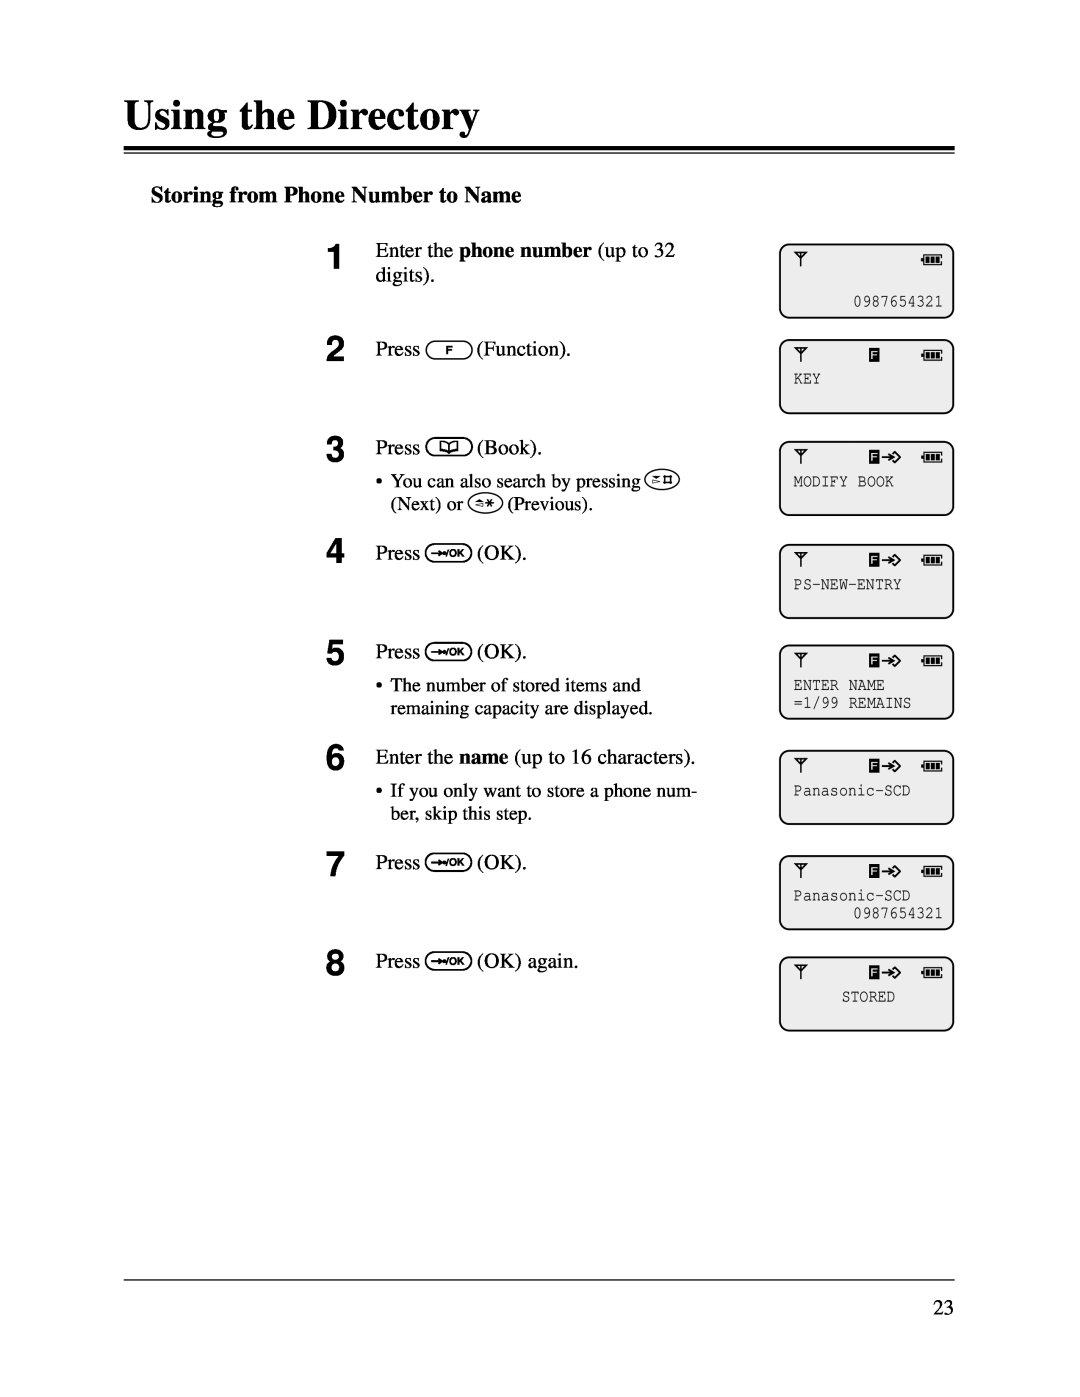 Panasonic KX-TD816CE, KX-TD1232CE user manual Storing from Phone Number to Name, Using the Directory 